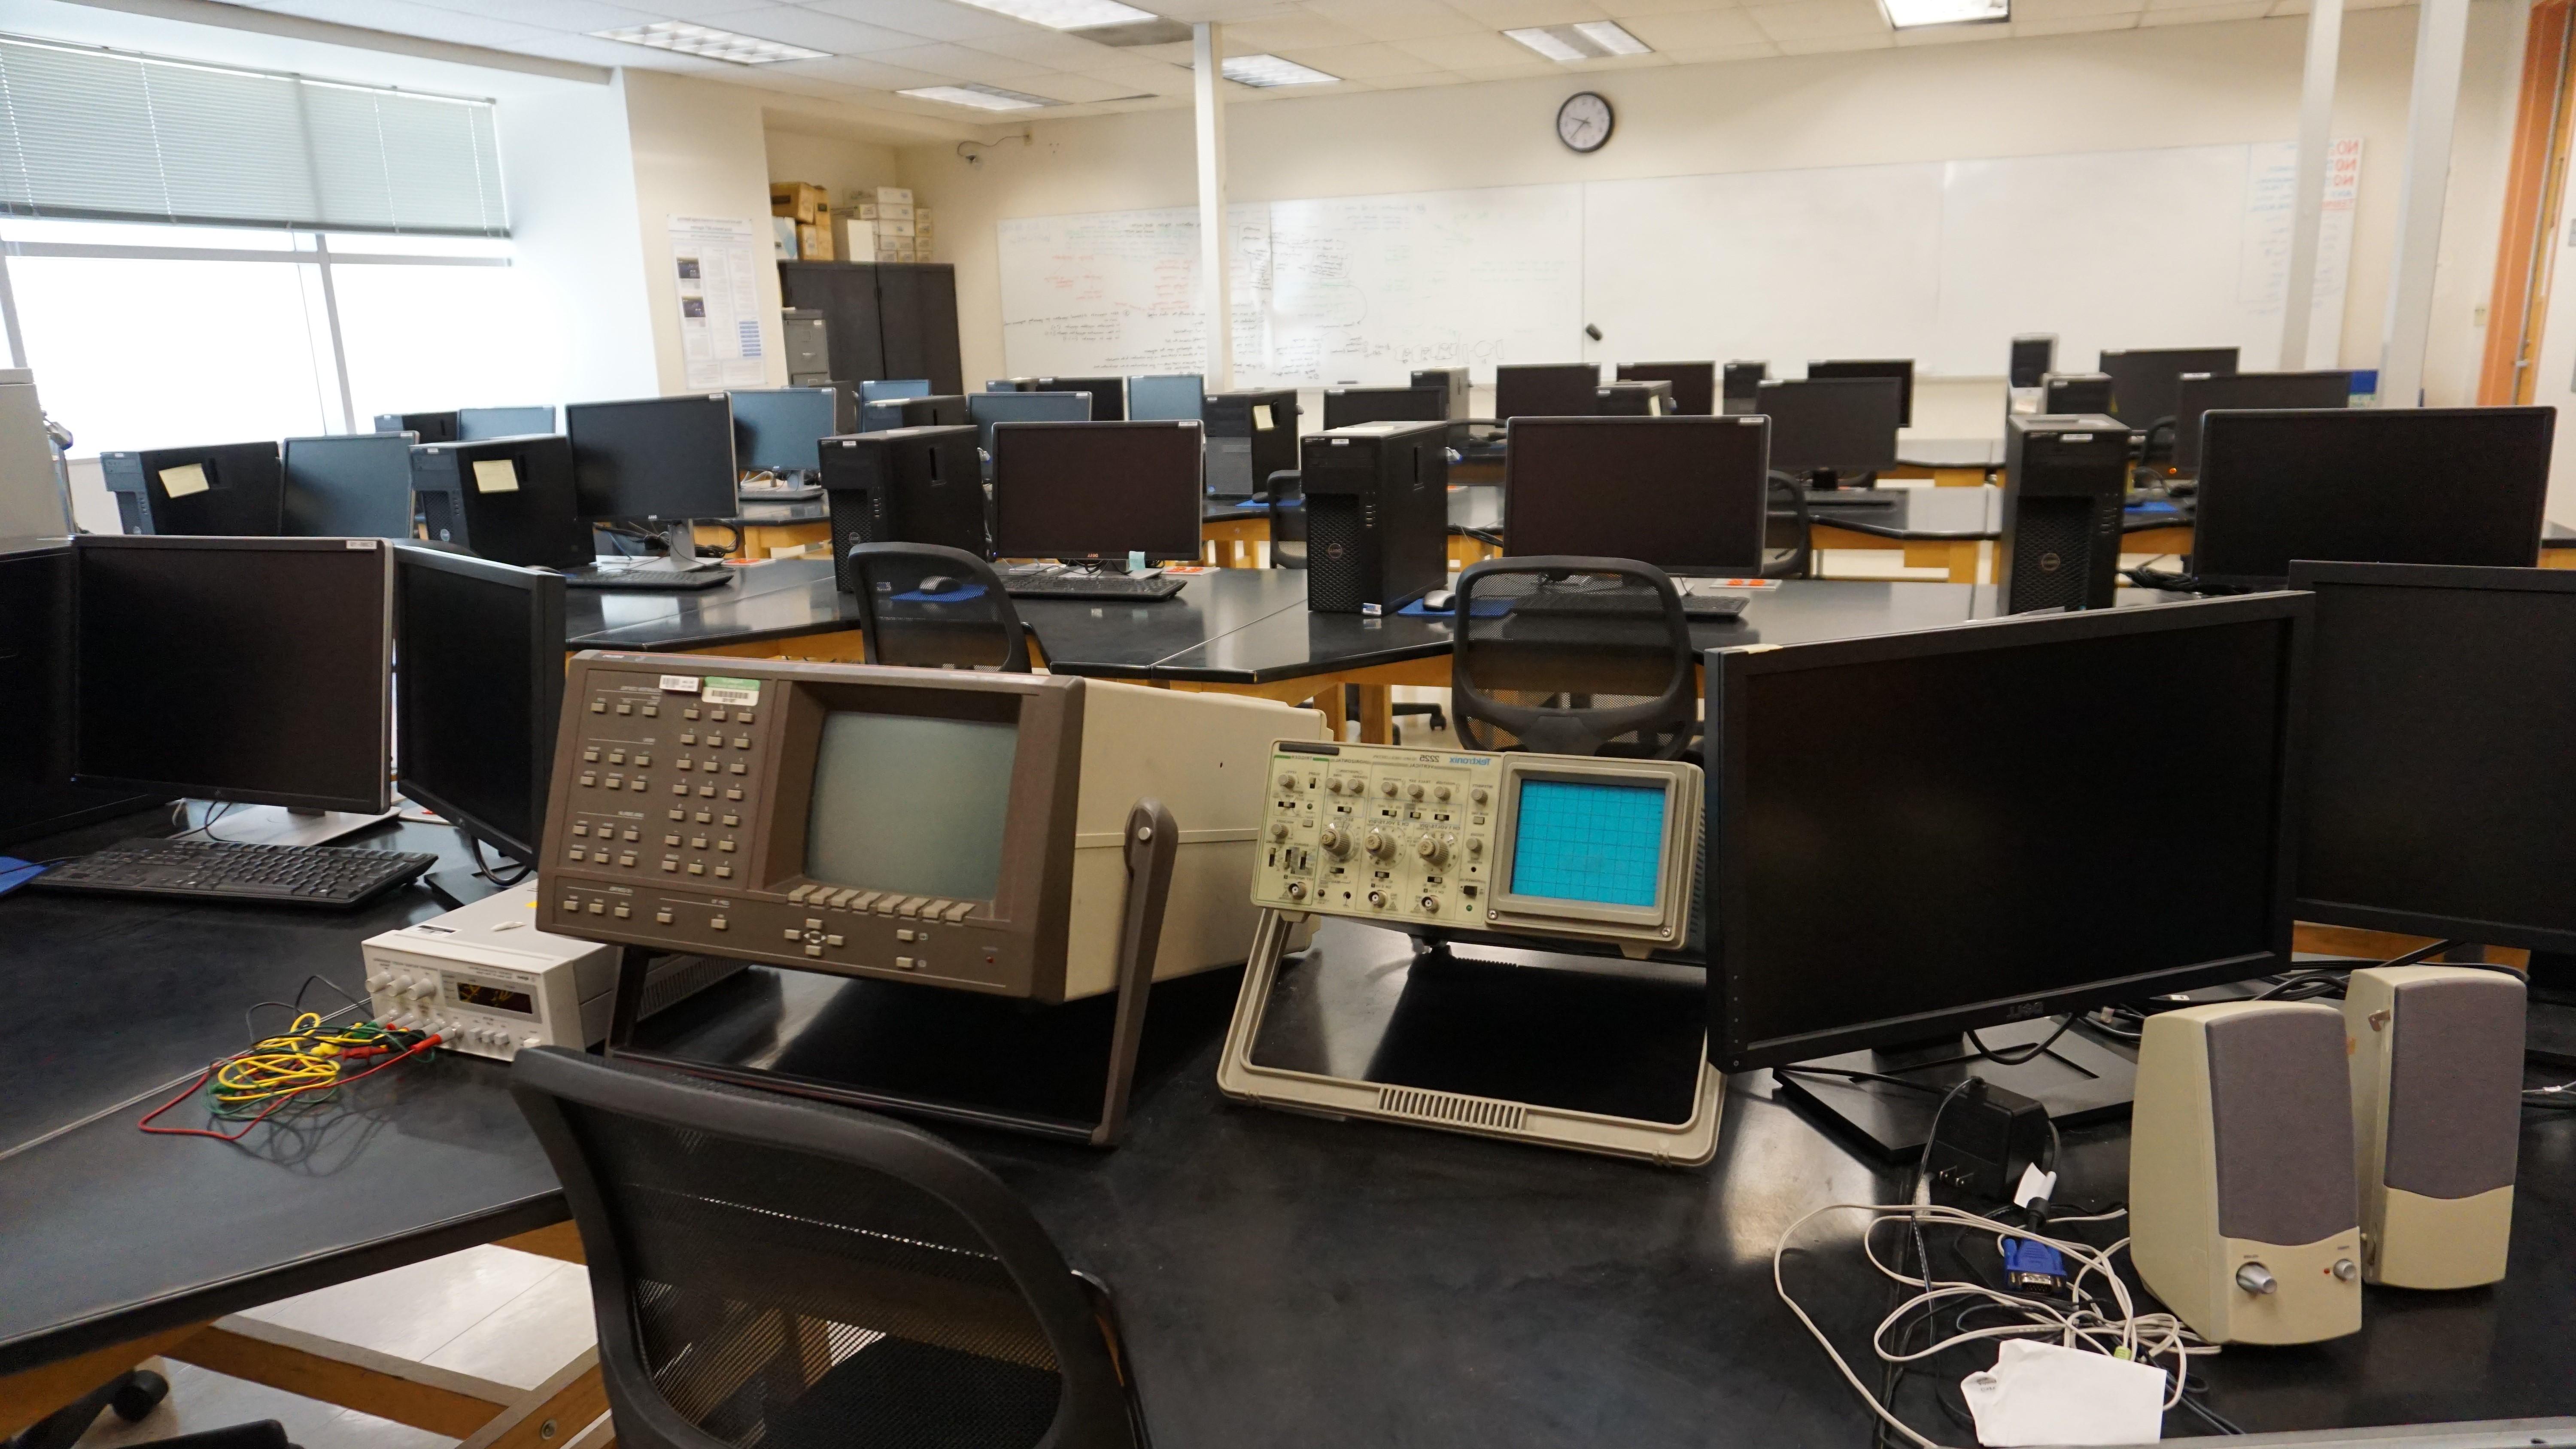 Rows of black monitors and a small bright blue screen on one of the lab machines.